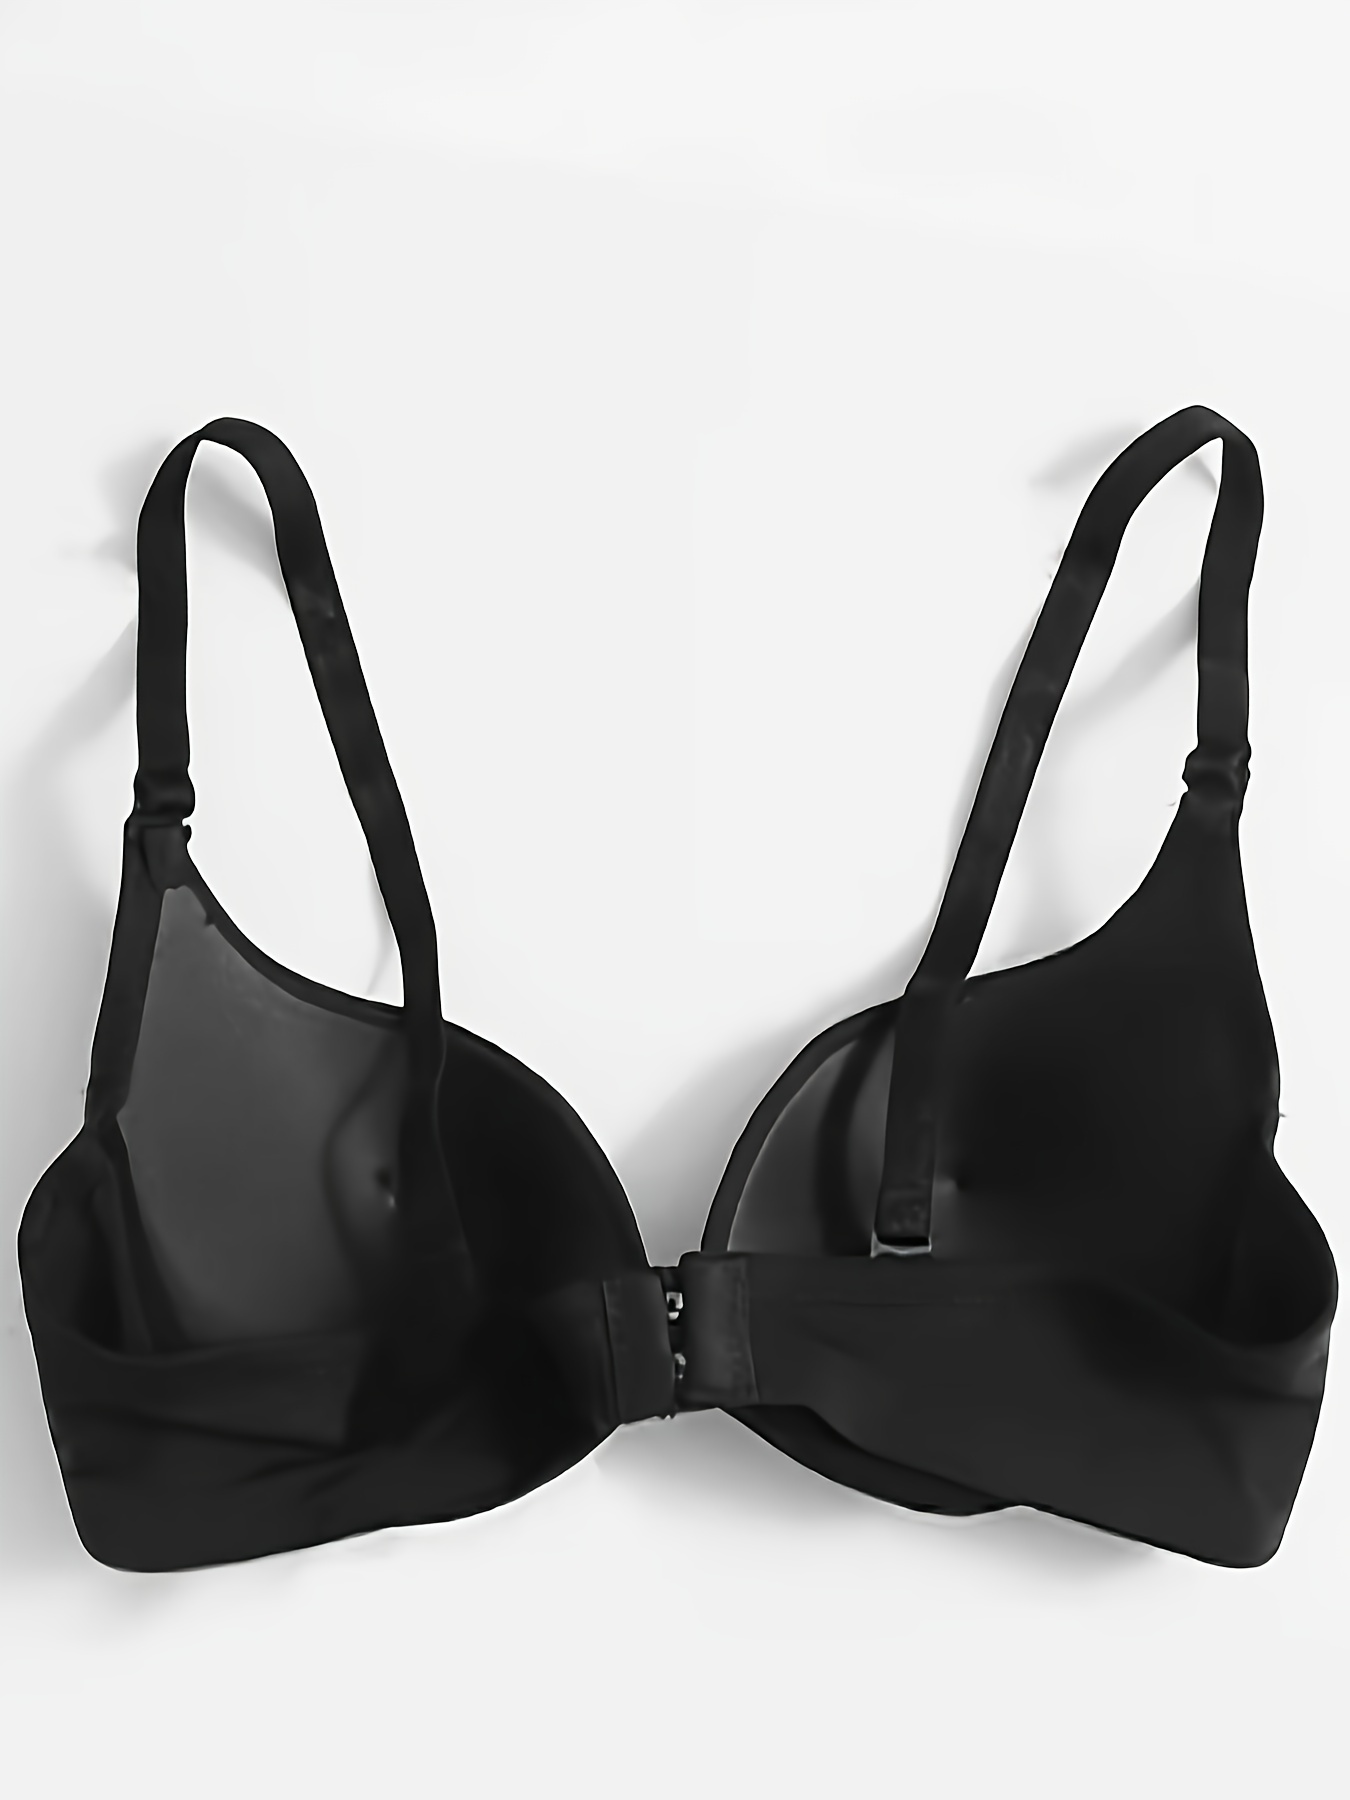 Girls Fashion Simple Solid Color Push up Wireless T-Shirt Bra